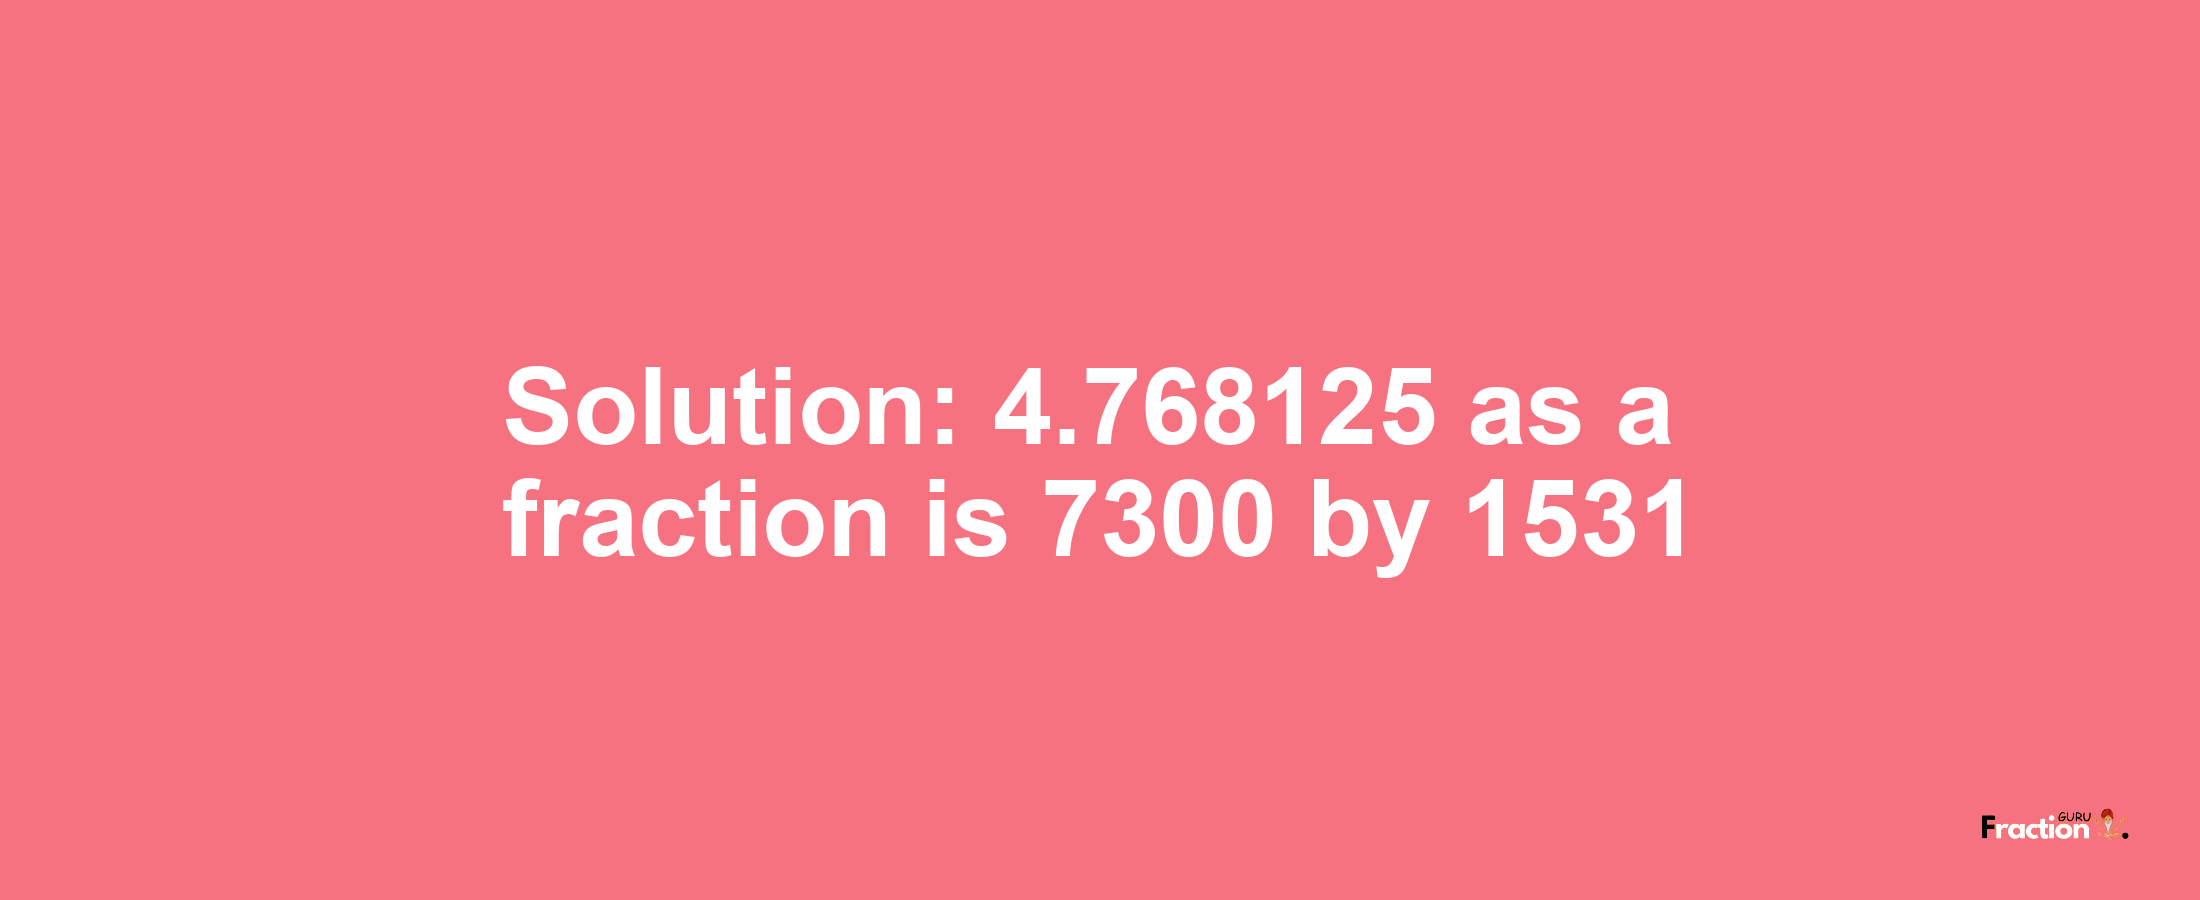 Solution:4.768125 as a fraction is 7300/1531